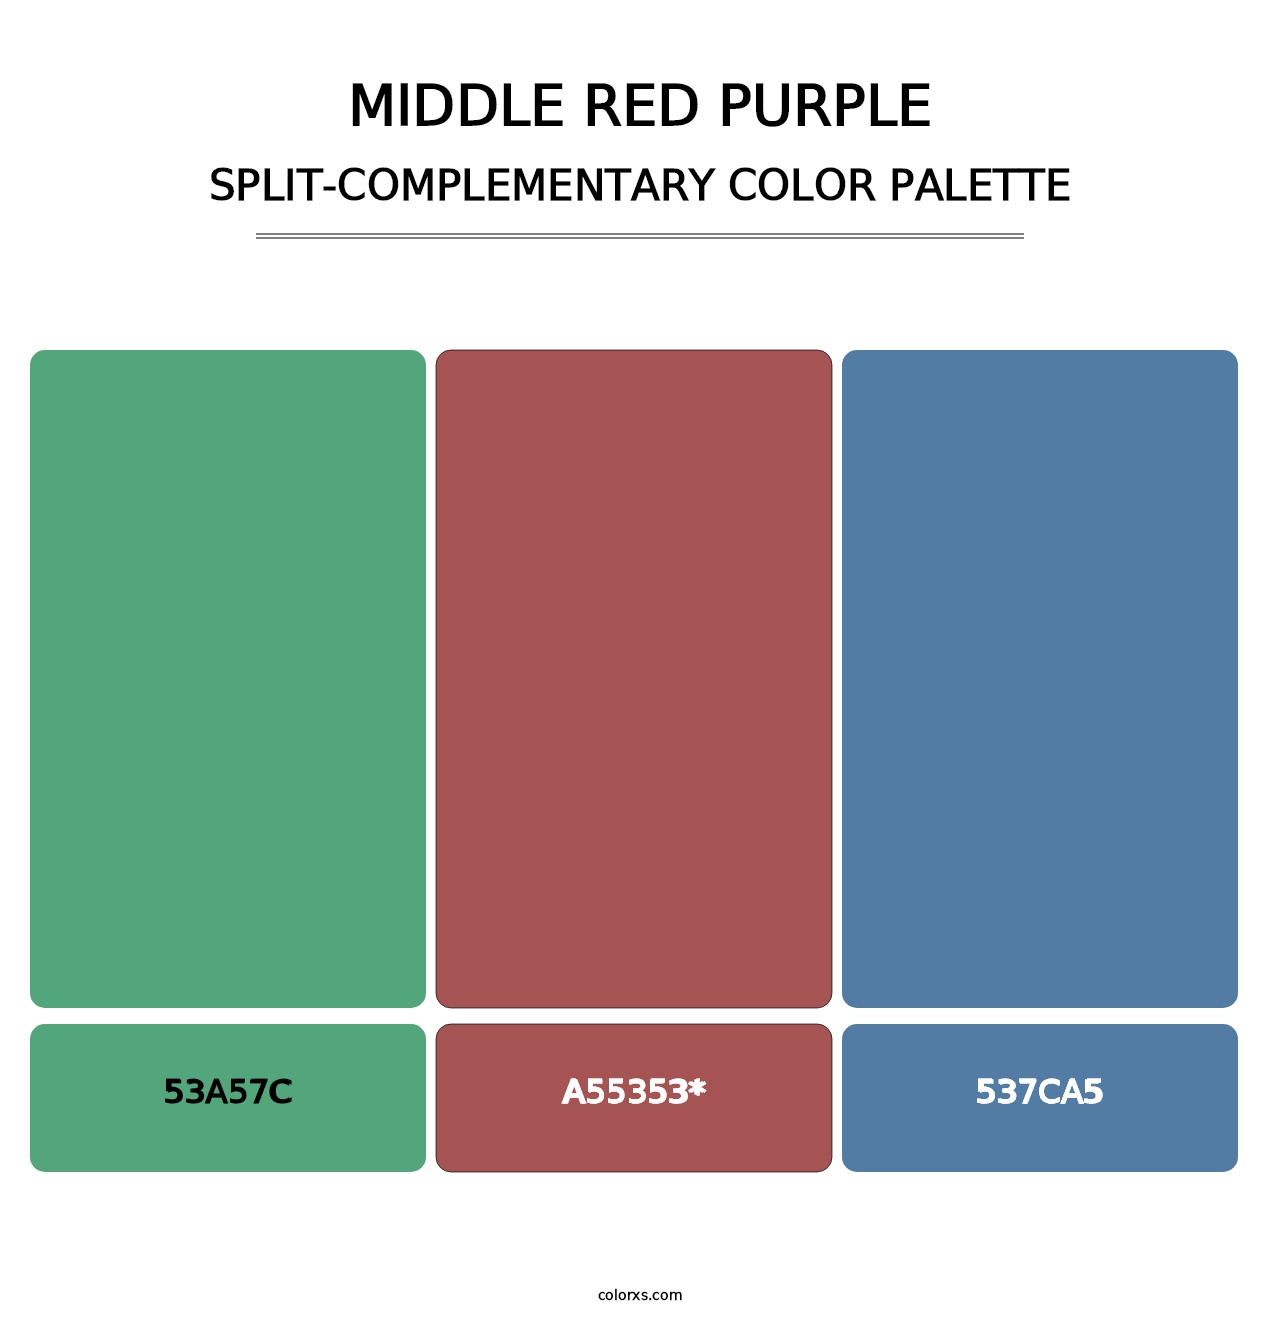 Middle Red Purple - Split-Complementary Color Palette